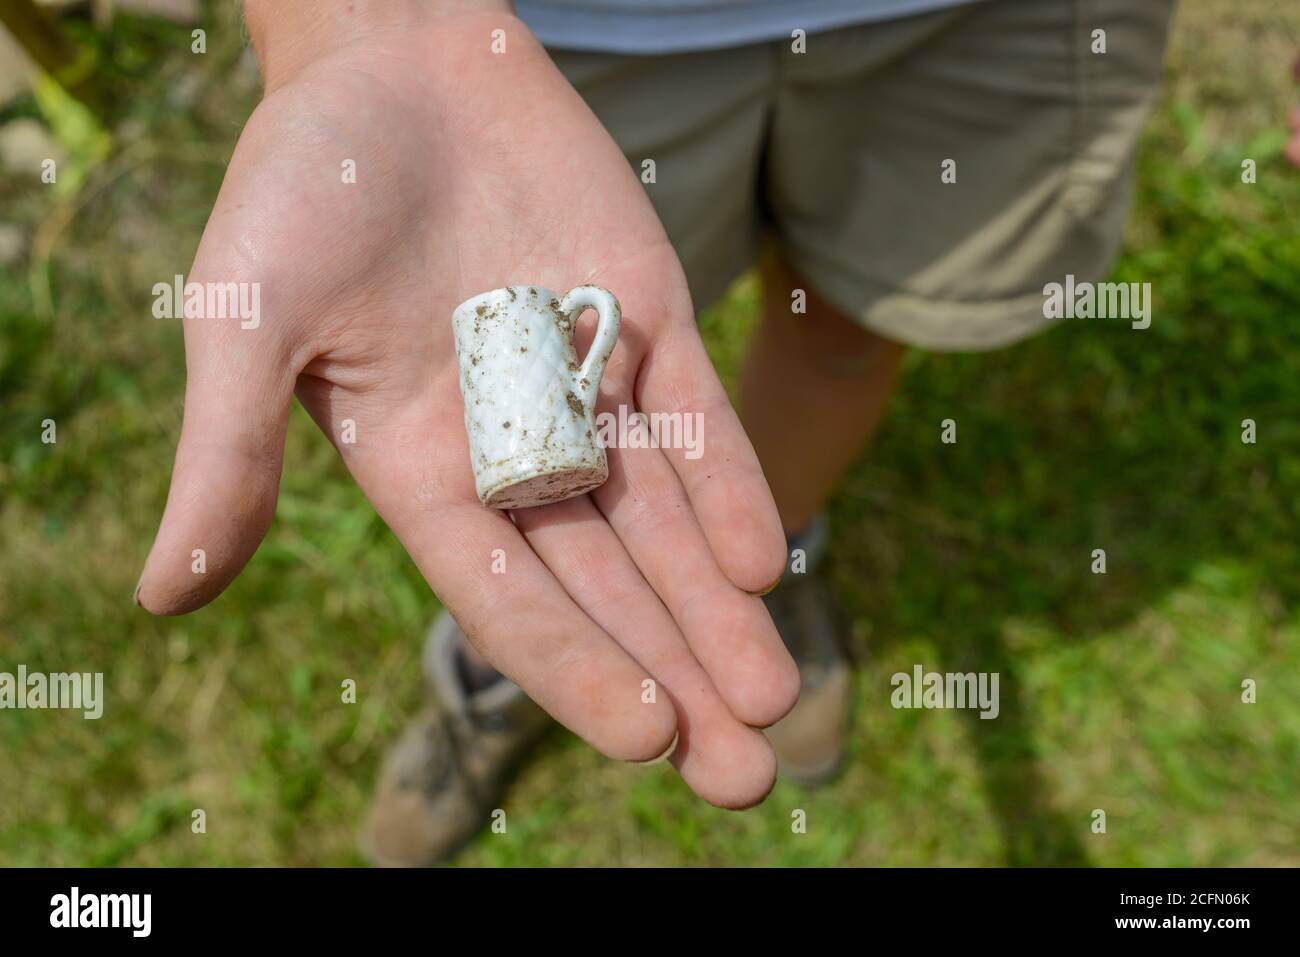 HAZLETON, PA - JUNE 30:  A student holds an uncovered artifact at the site of an archaeologic dig June 30, 2014 in Hazleton, Pennsylvania. The team is Stock Photo